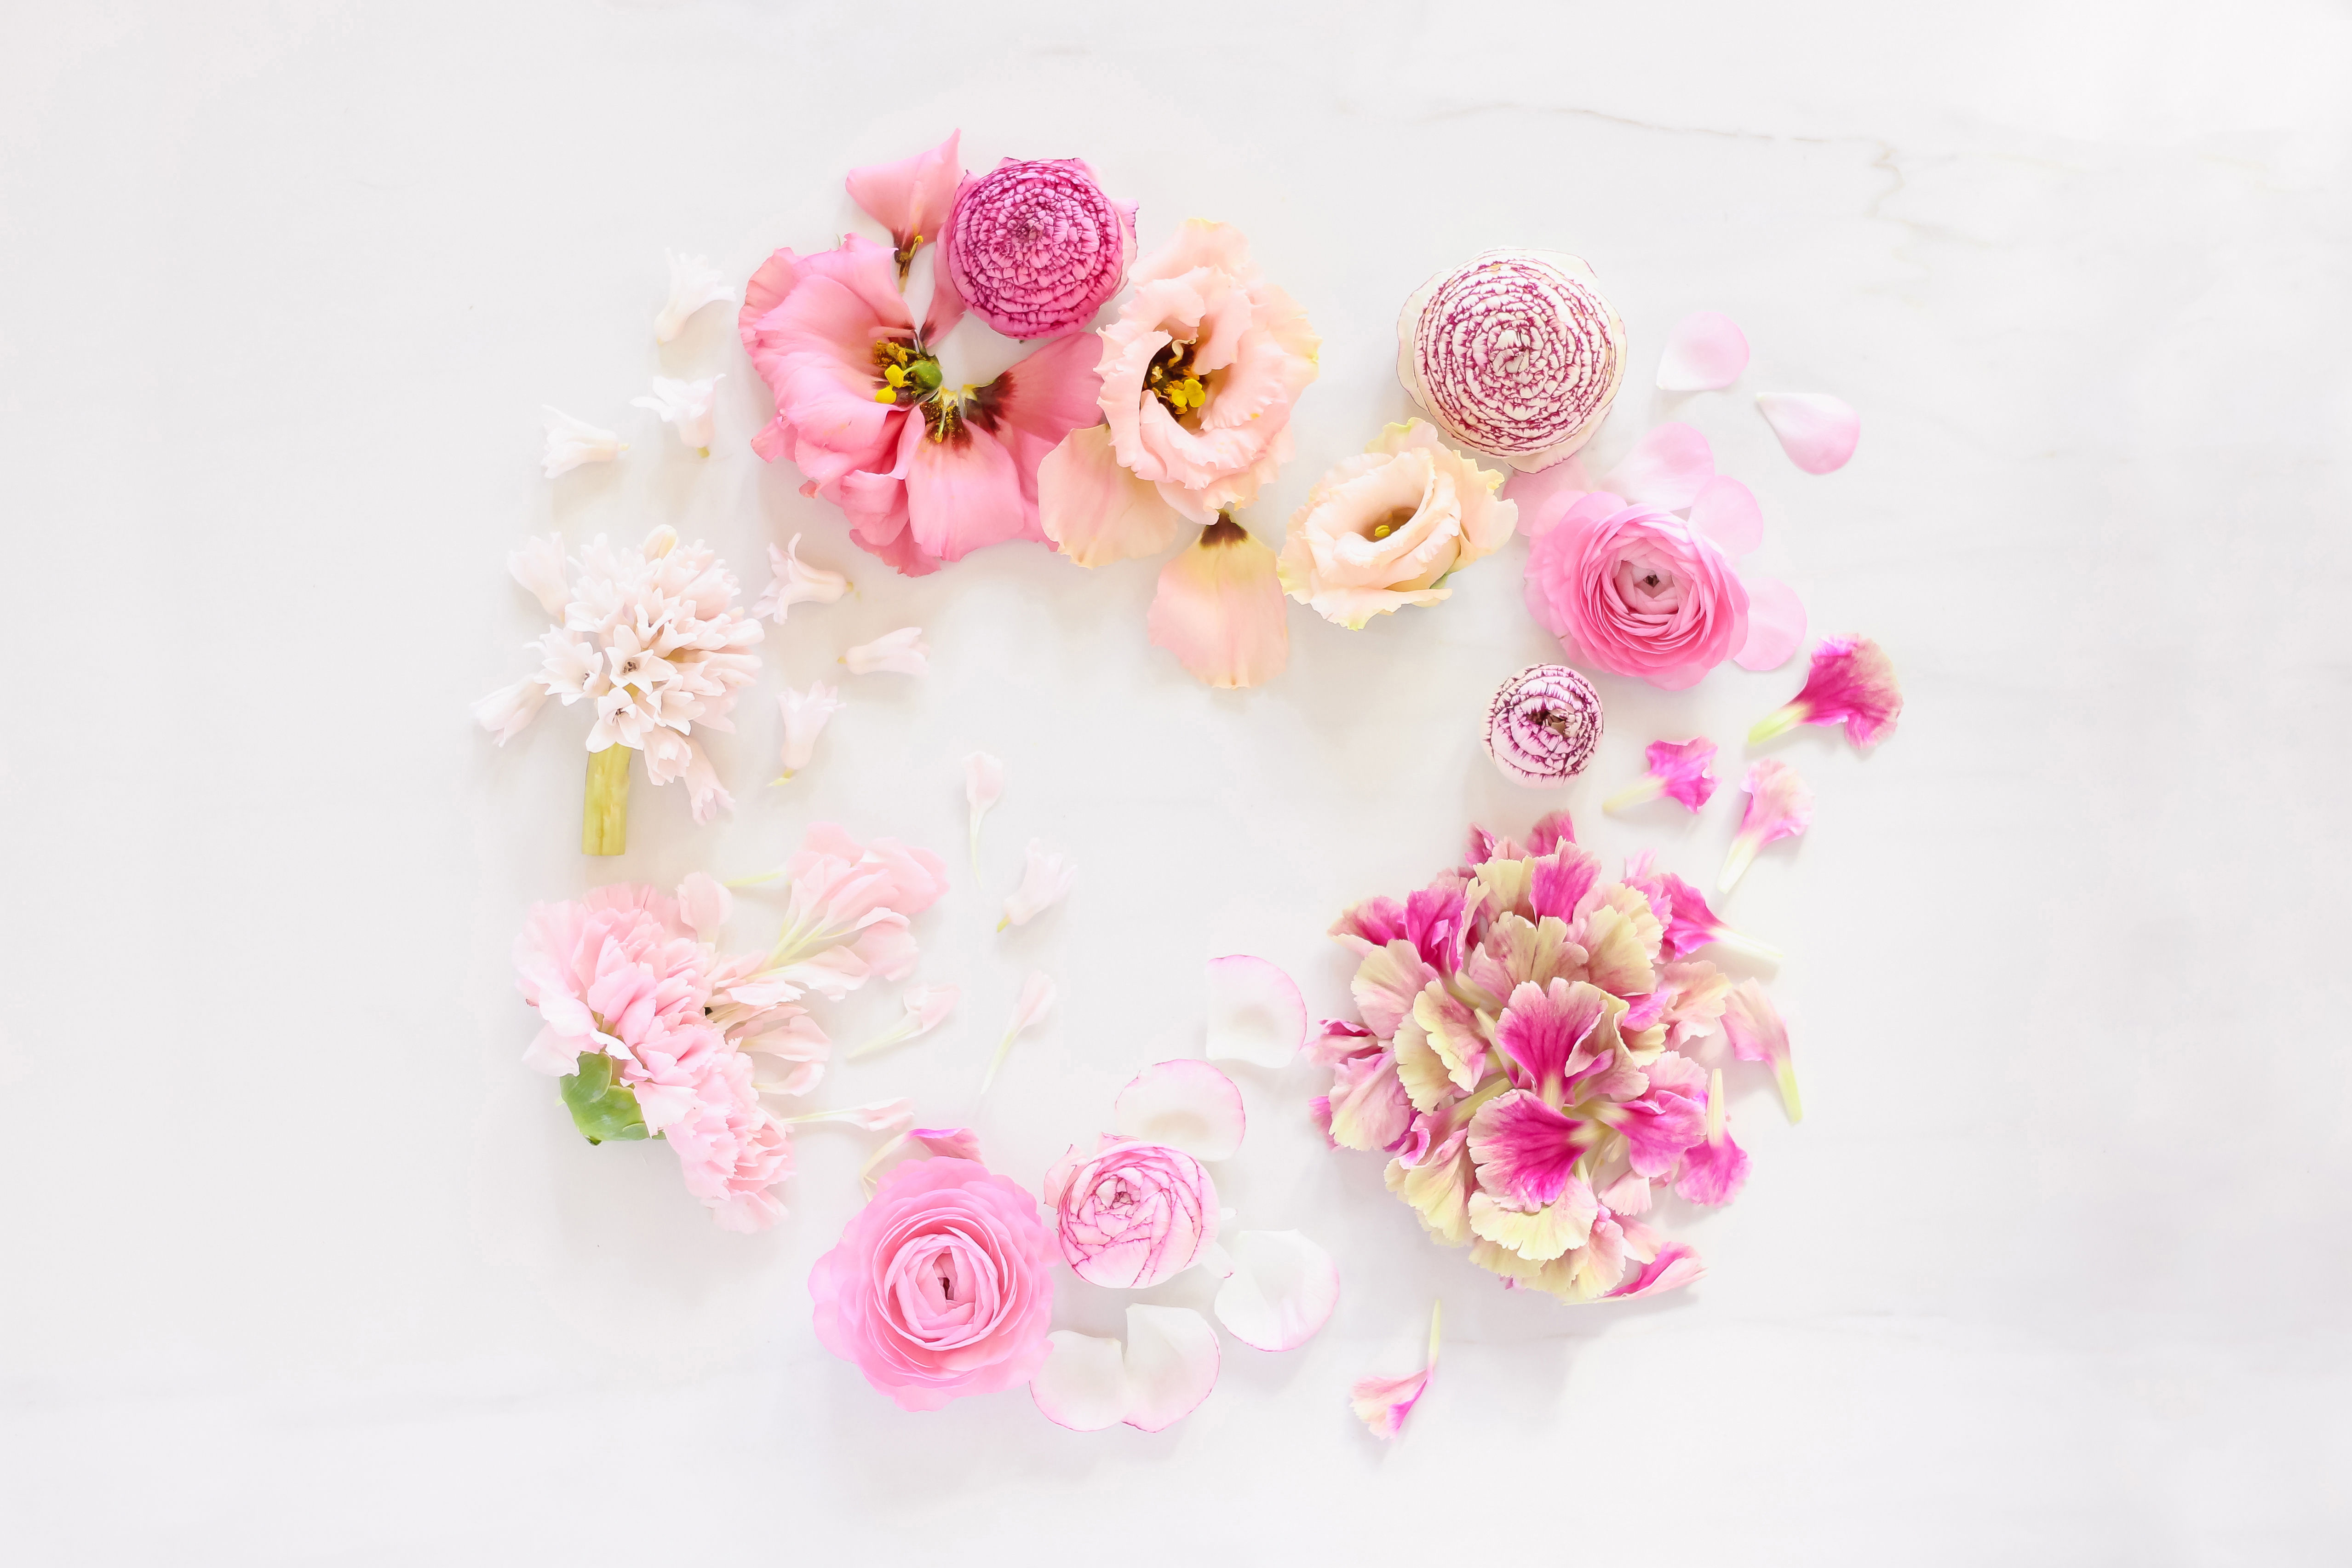 DIGITAL BLOOMS APRIL 2019 | FREE DESKTOP WALLPAPER + DIGITAL BLOOMS TURNS 3! | Free Spring 2019 Floral Desktop Wallpapers featuring Pink Ranunculus, Lisianthus, Hyacinths and Carnations on a marble background | Pantone Spring / Summer 2019 Tech Wallpapers | FREE Pink Floral Tech Wallpapers | The Best FREE Spring Tech Wallpapers | Free Floral Tech Wallpapers Spring 2019 // JustineCelina.com x Rebecca Dawn Design